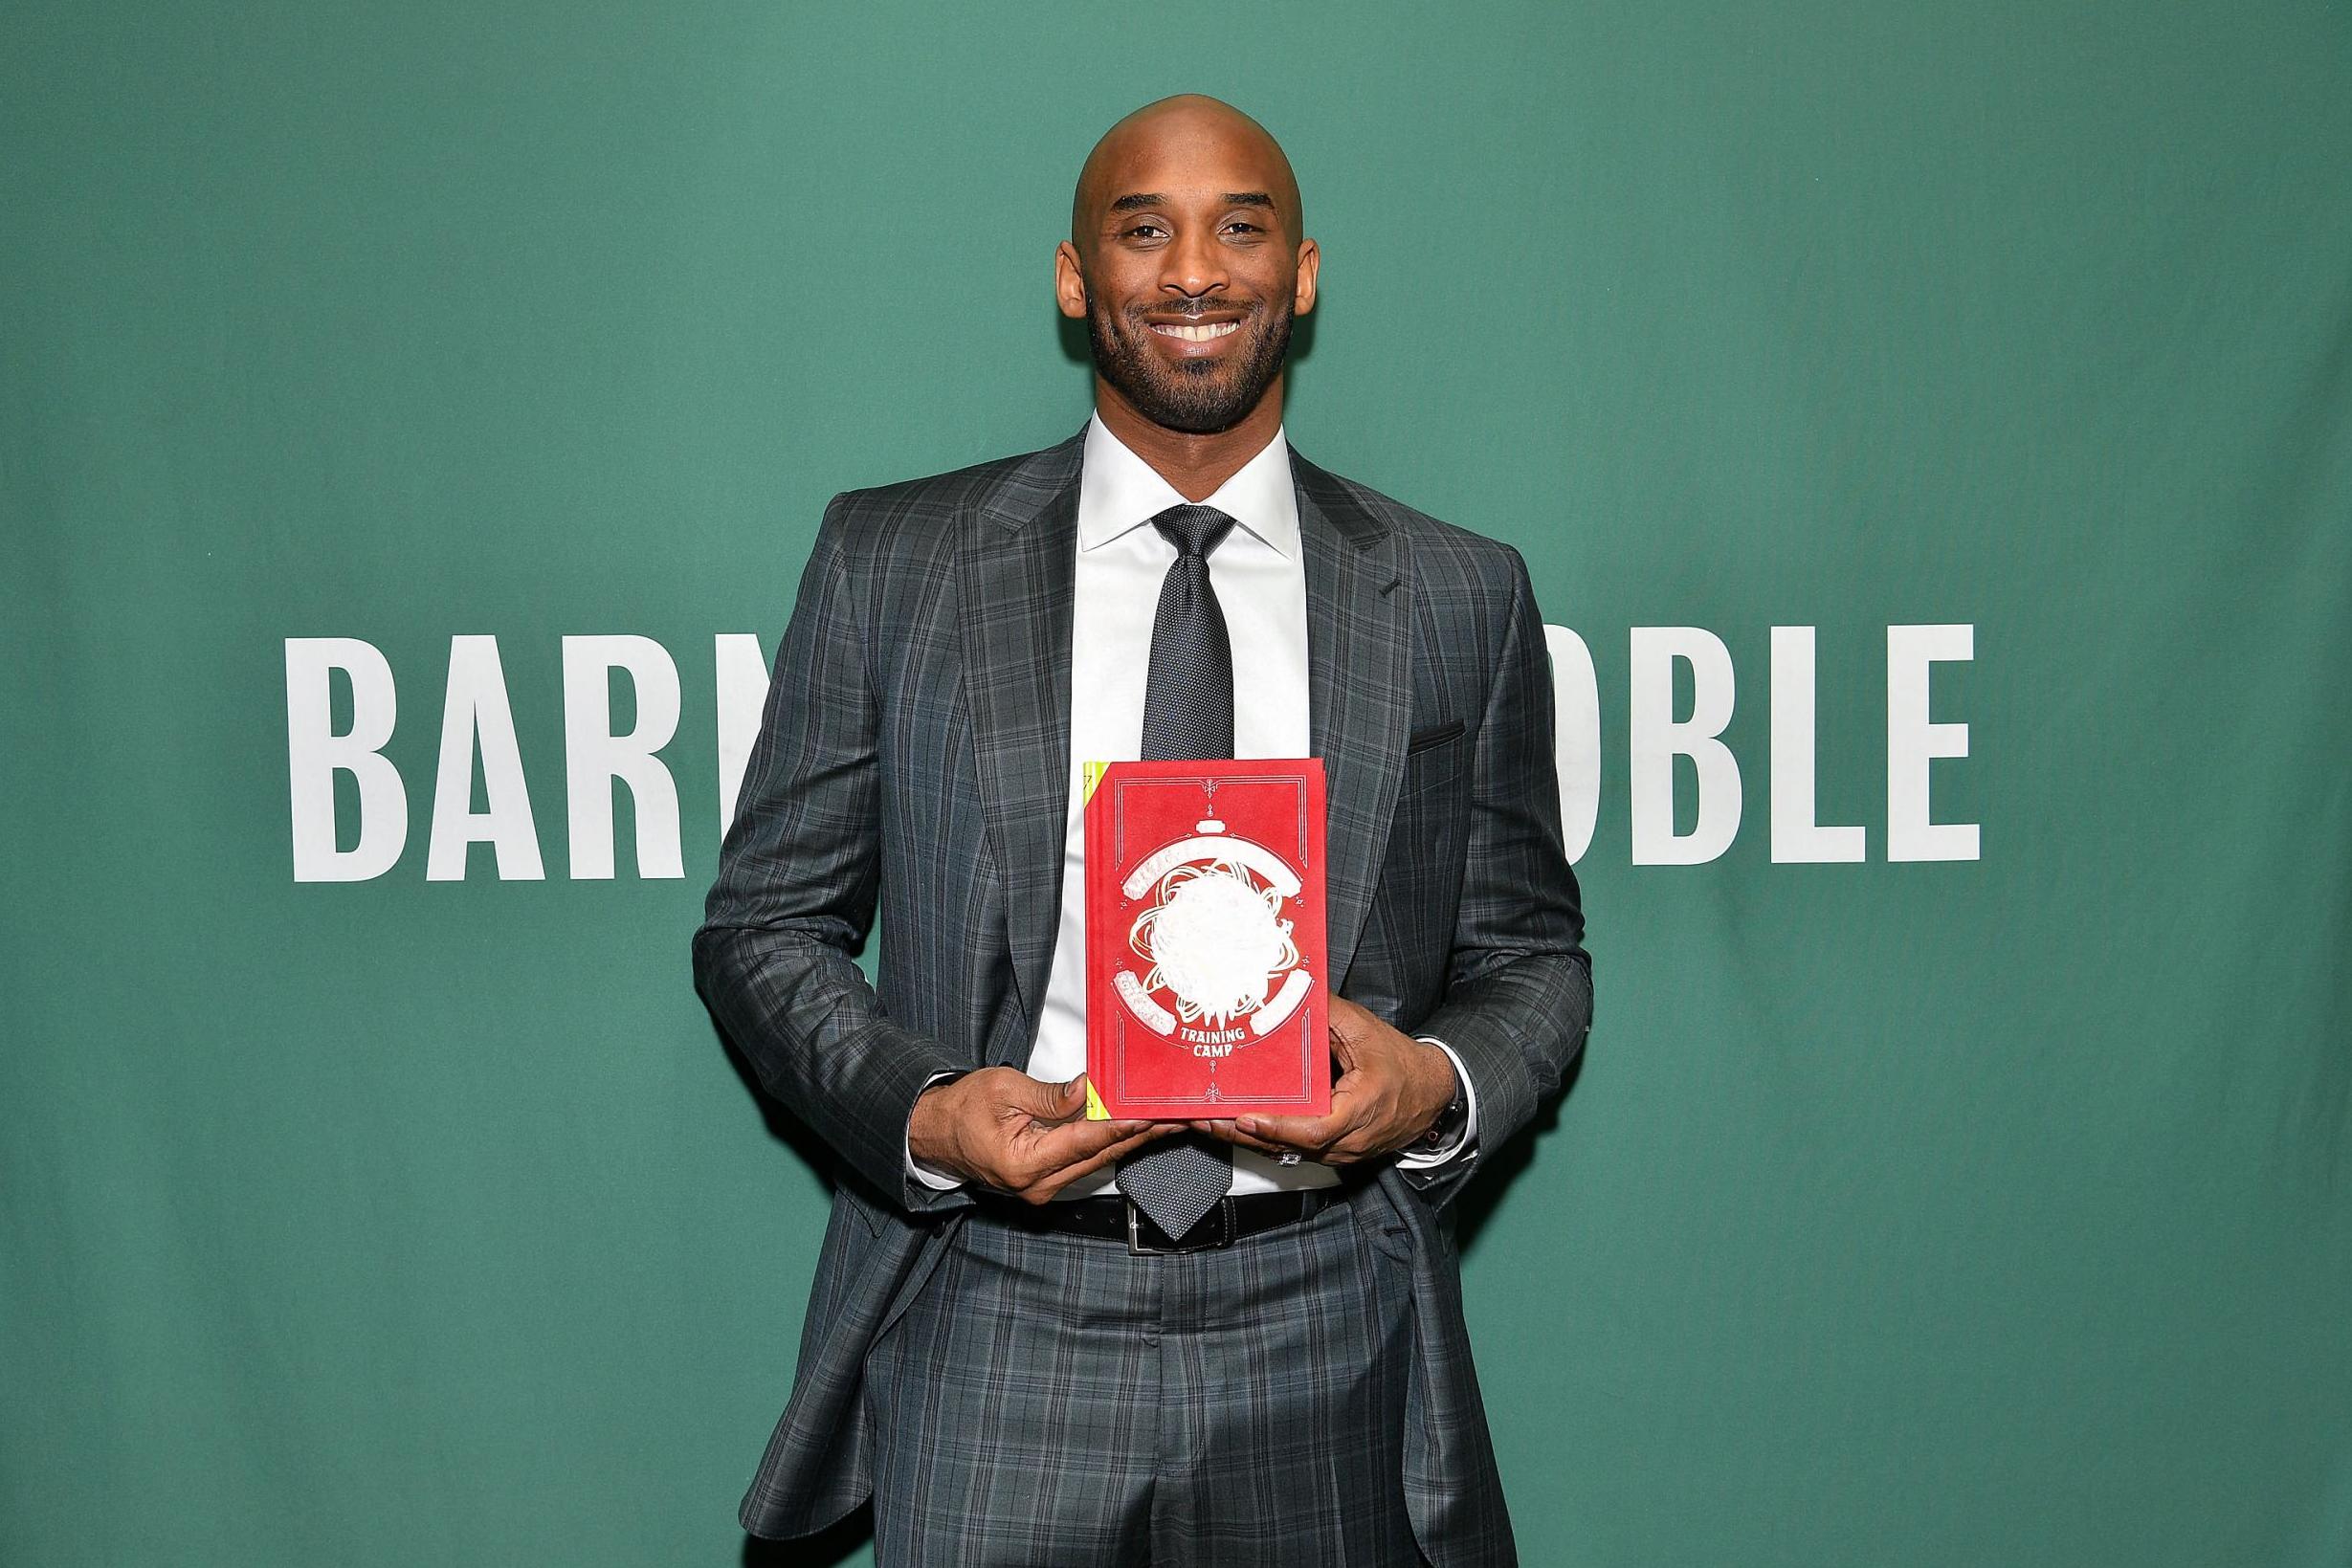 Kobe Bryant promotes his book 'The Wizenard Series: Training Camp' on 20 March 2019 in New York City.